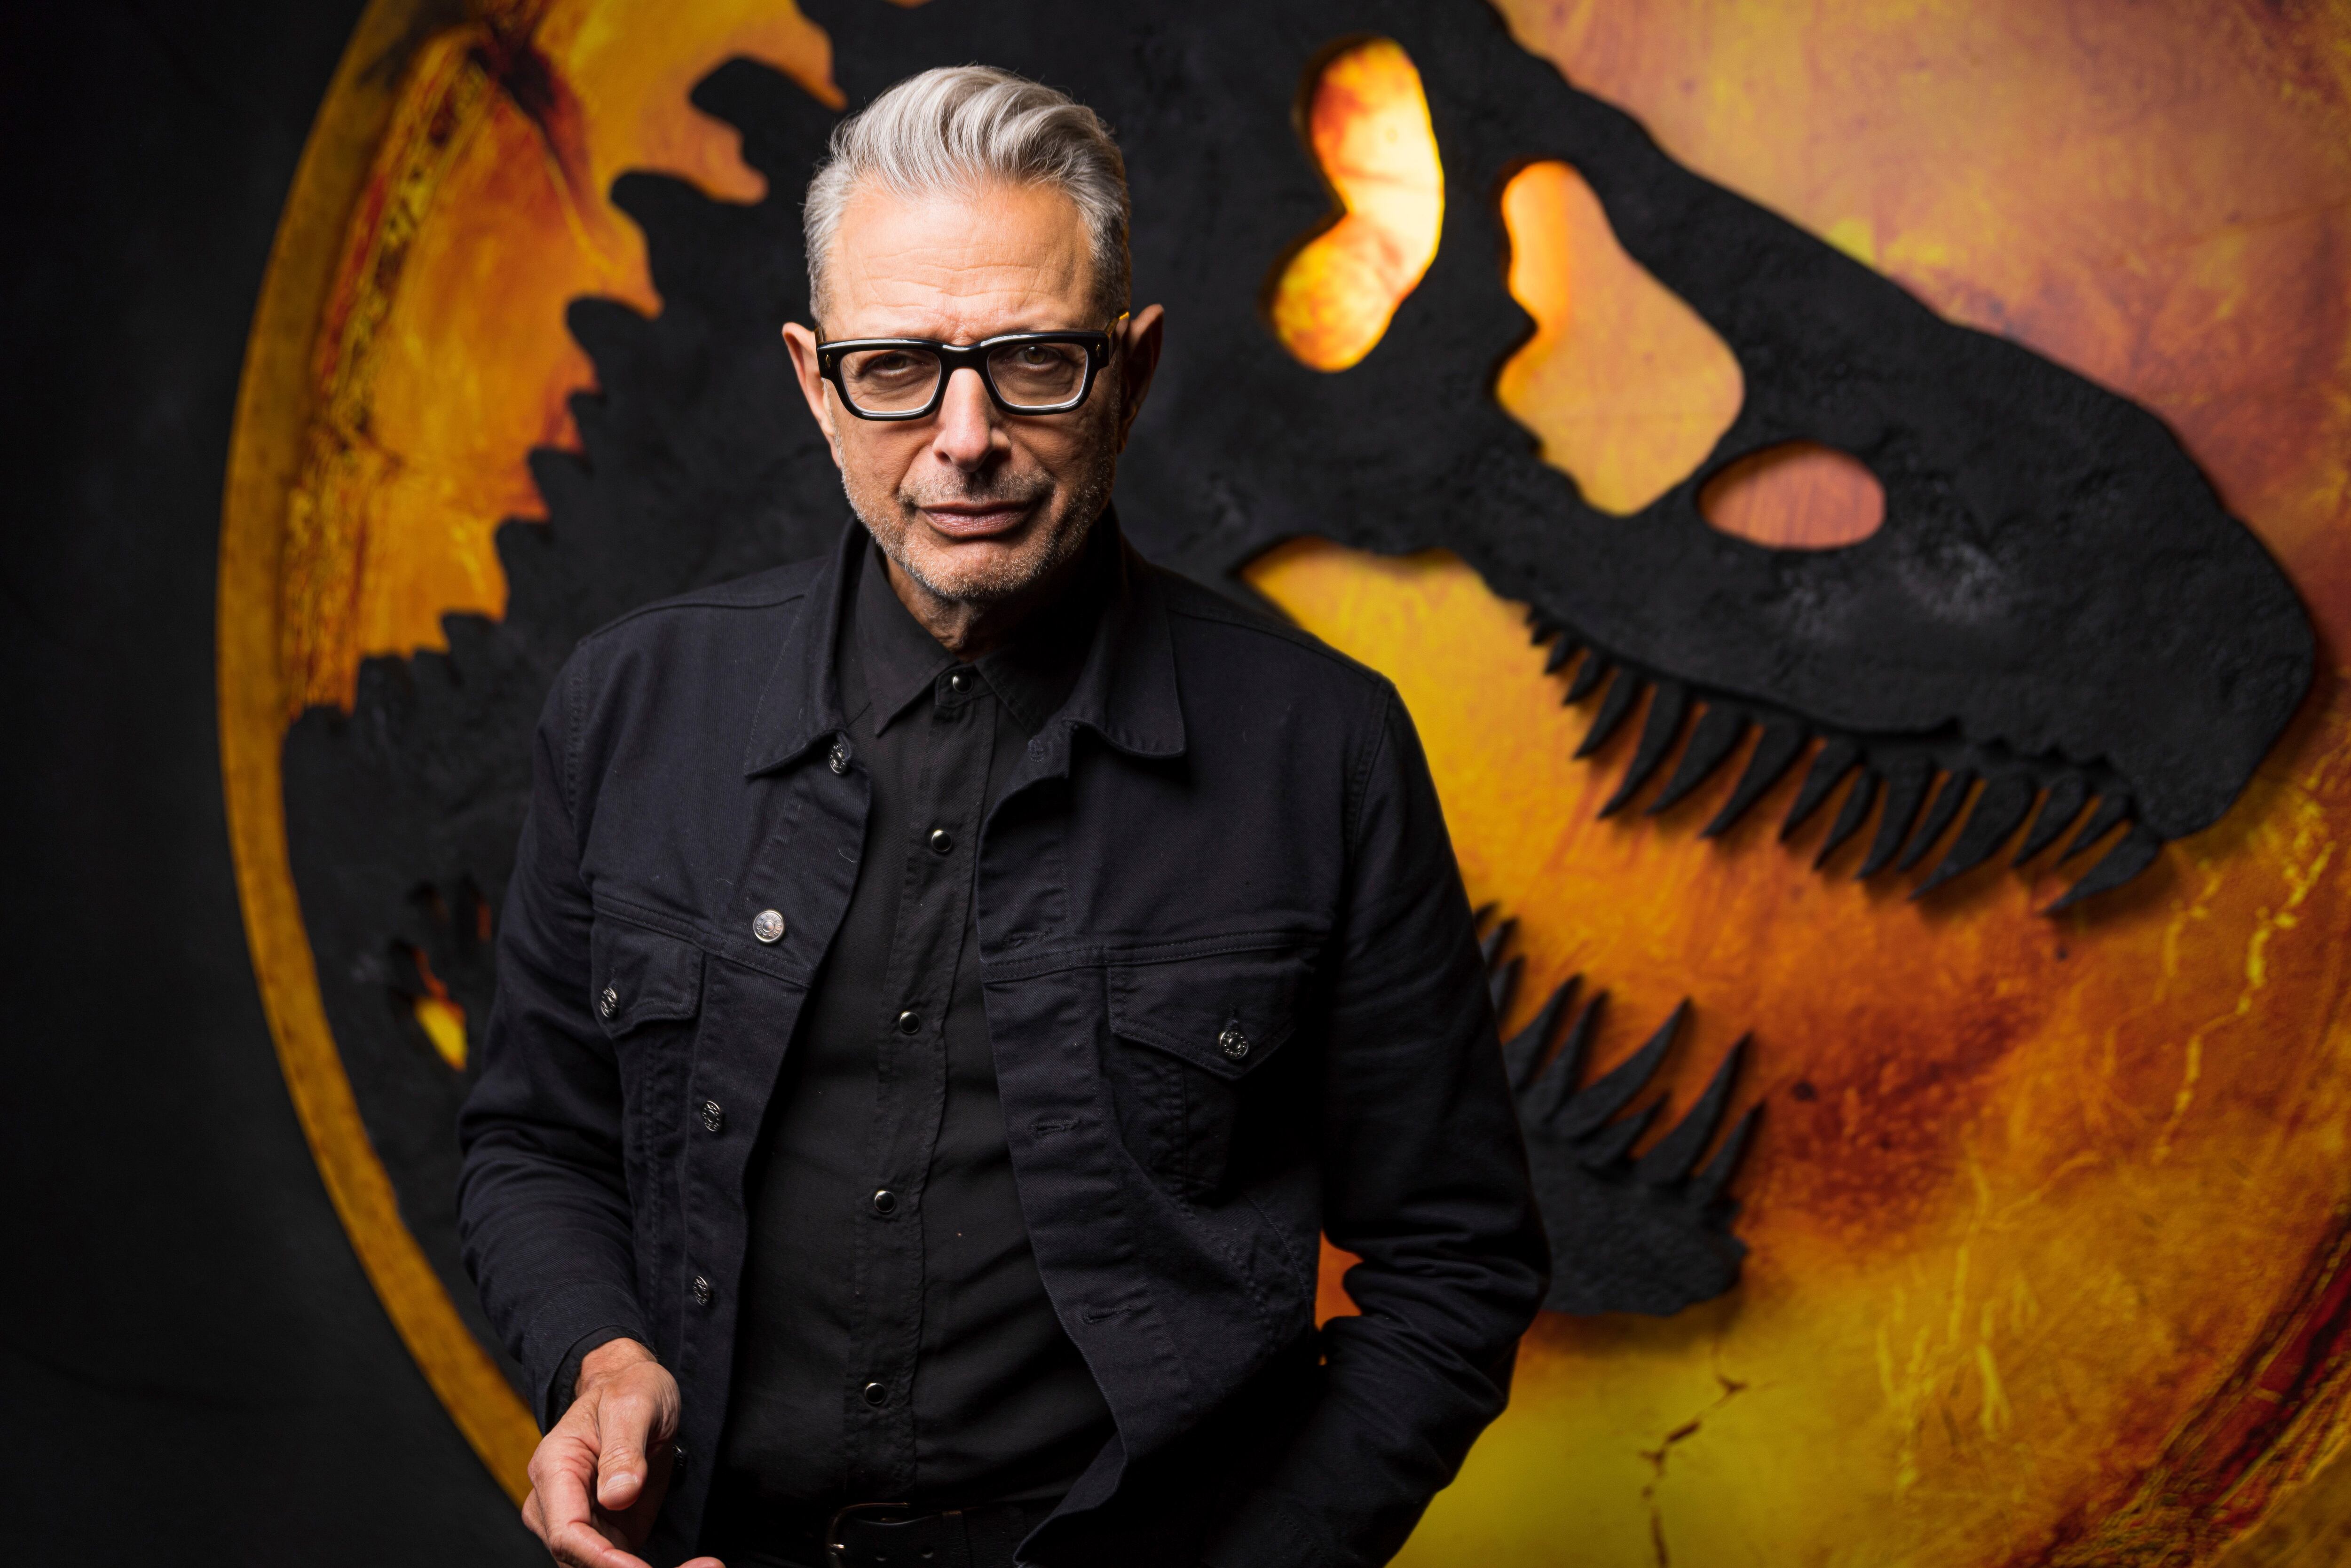 Jeff Goldblum takes one more bite out of ‘Jurassic World’